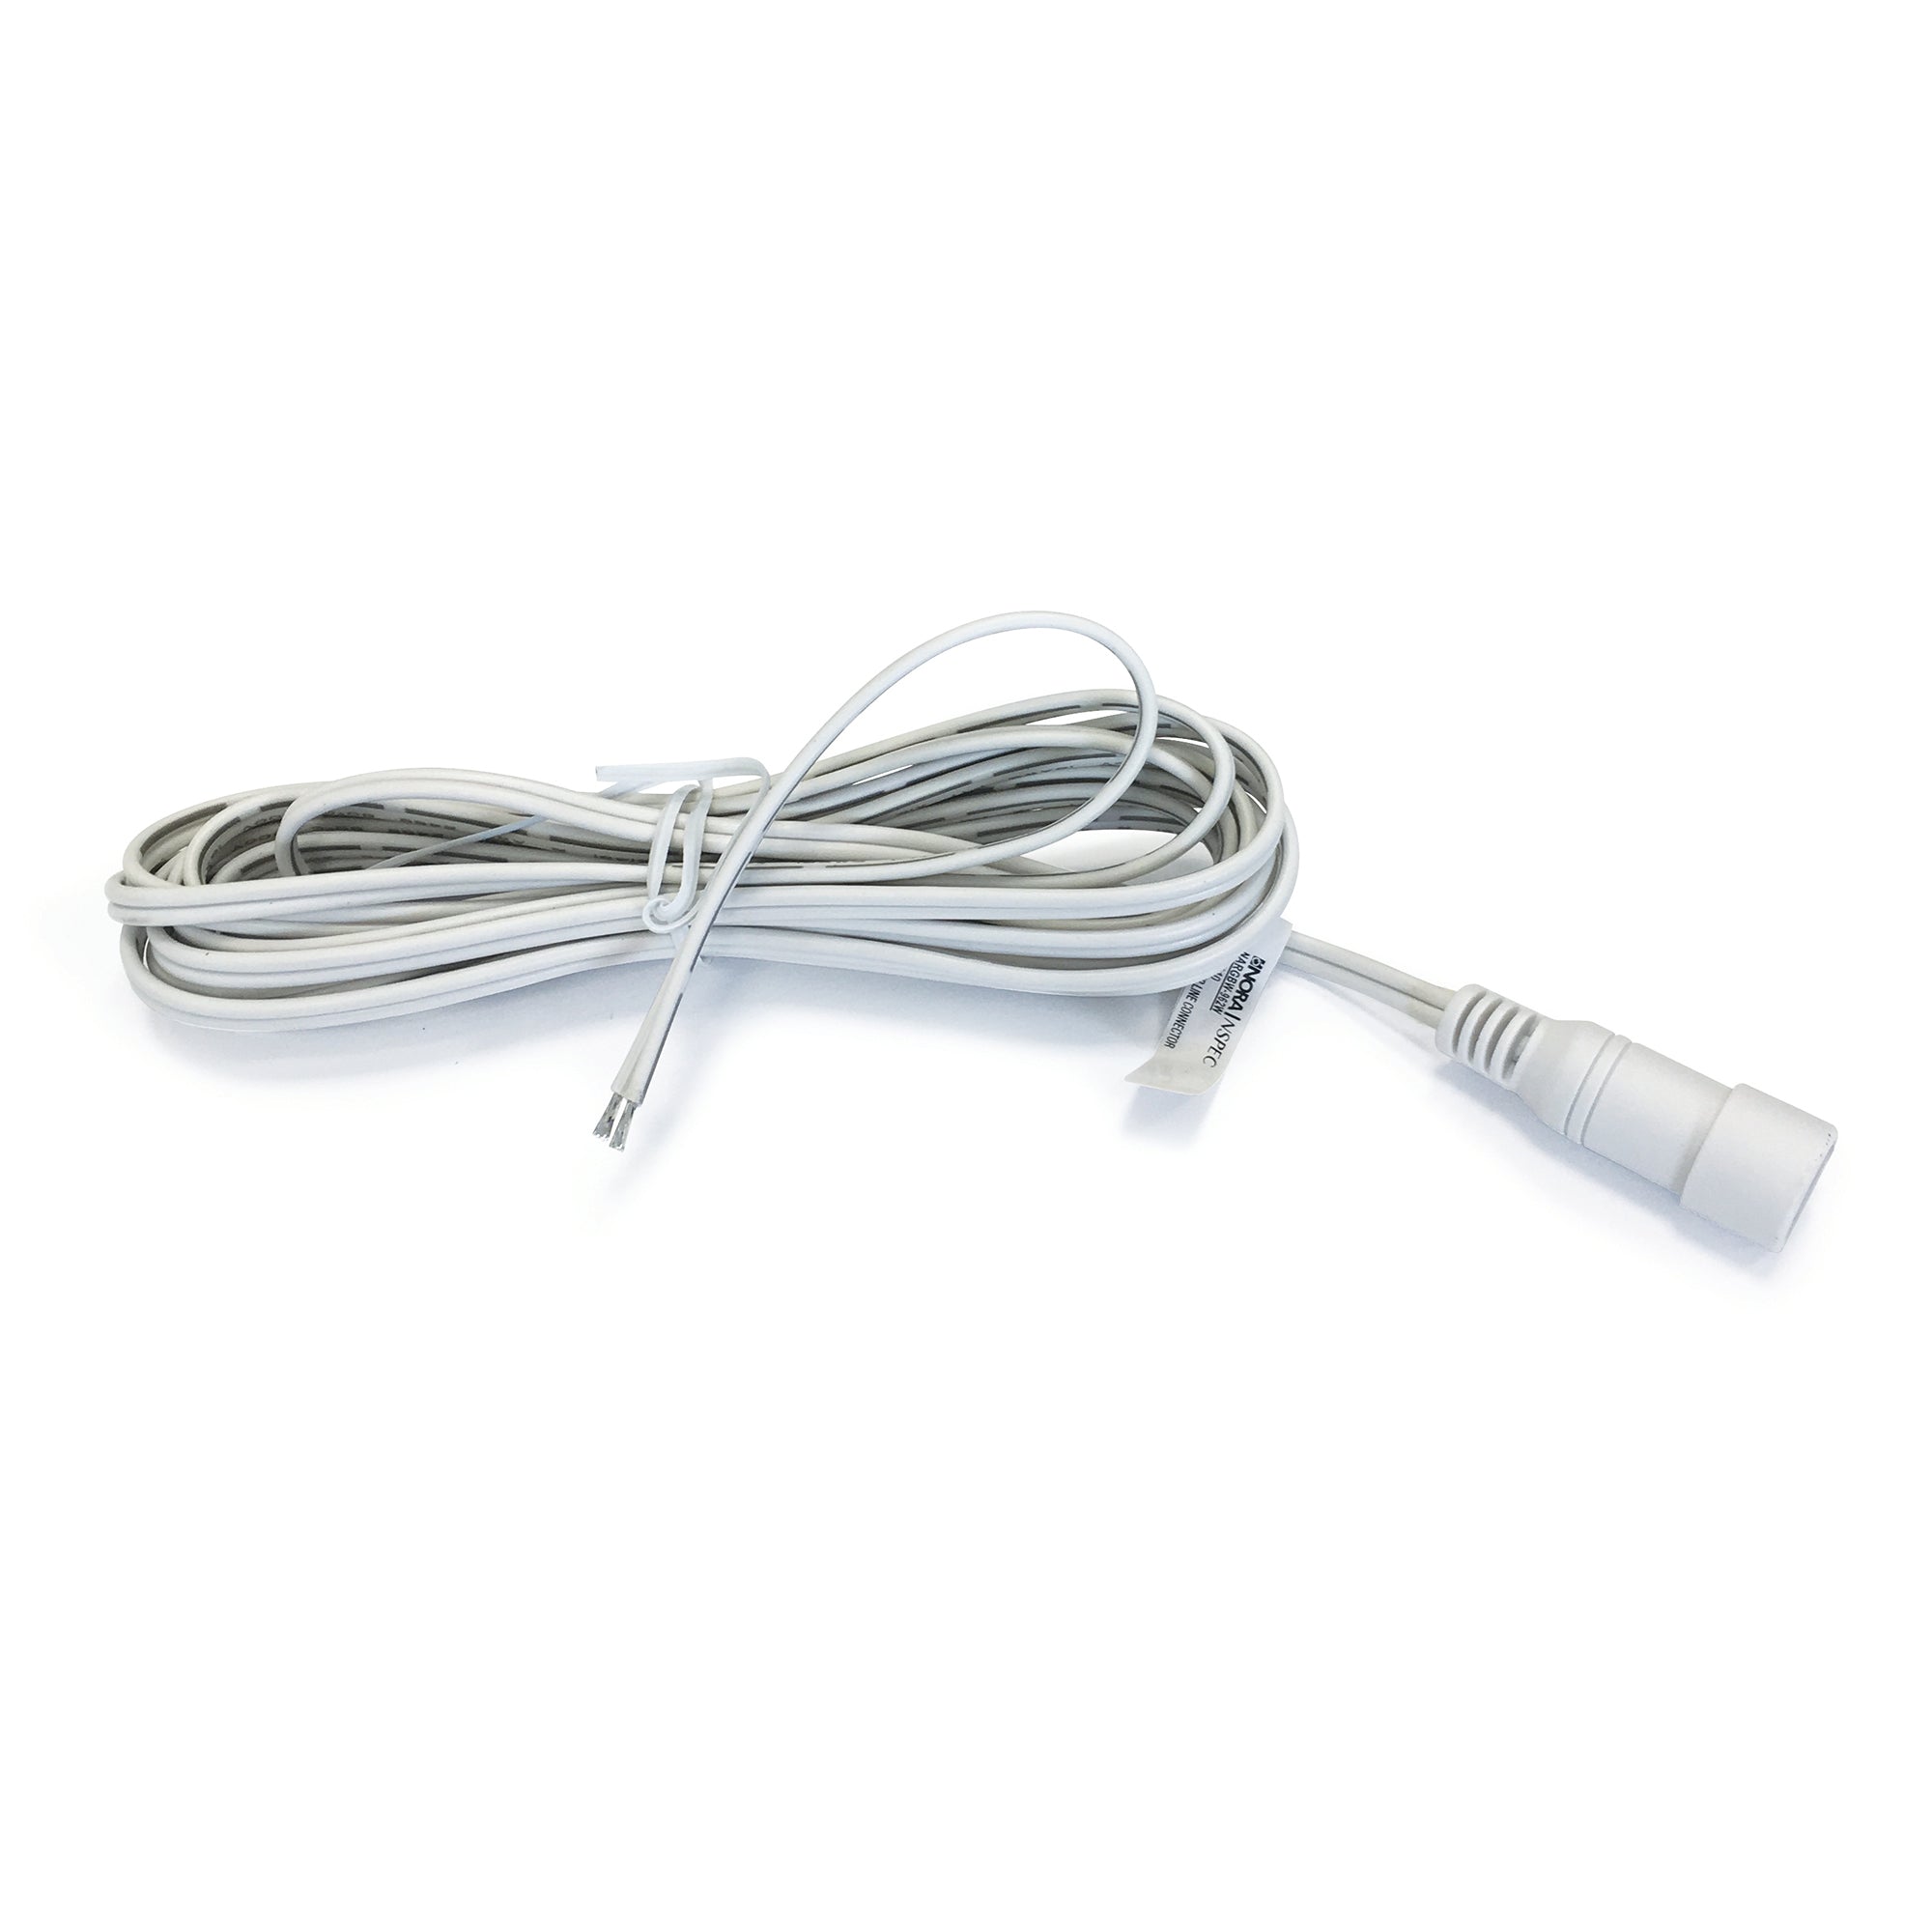 Nora Lighting NARGB-762W 10' Controller Power Line Connector For RGB Controller - White